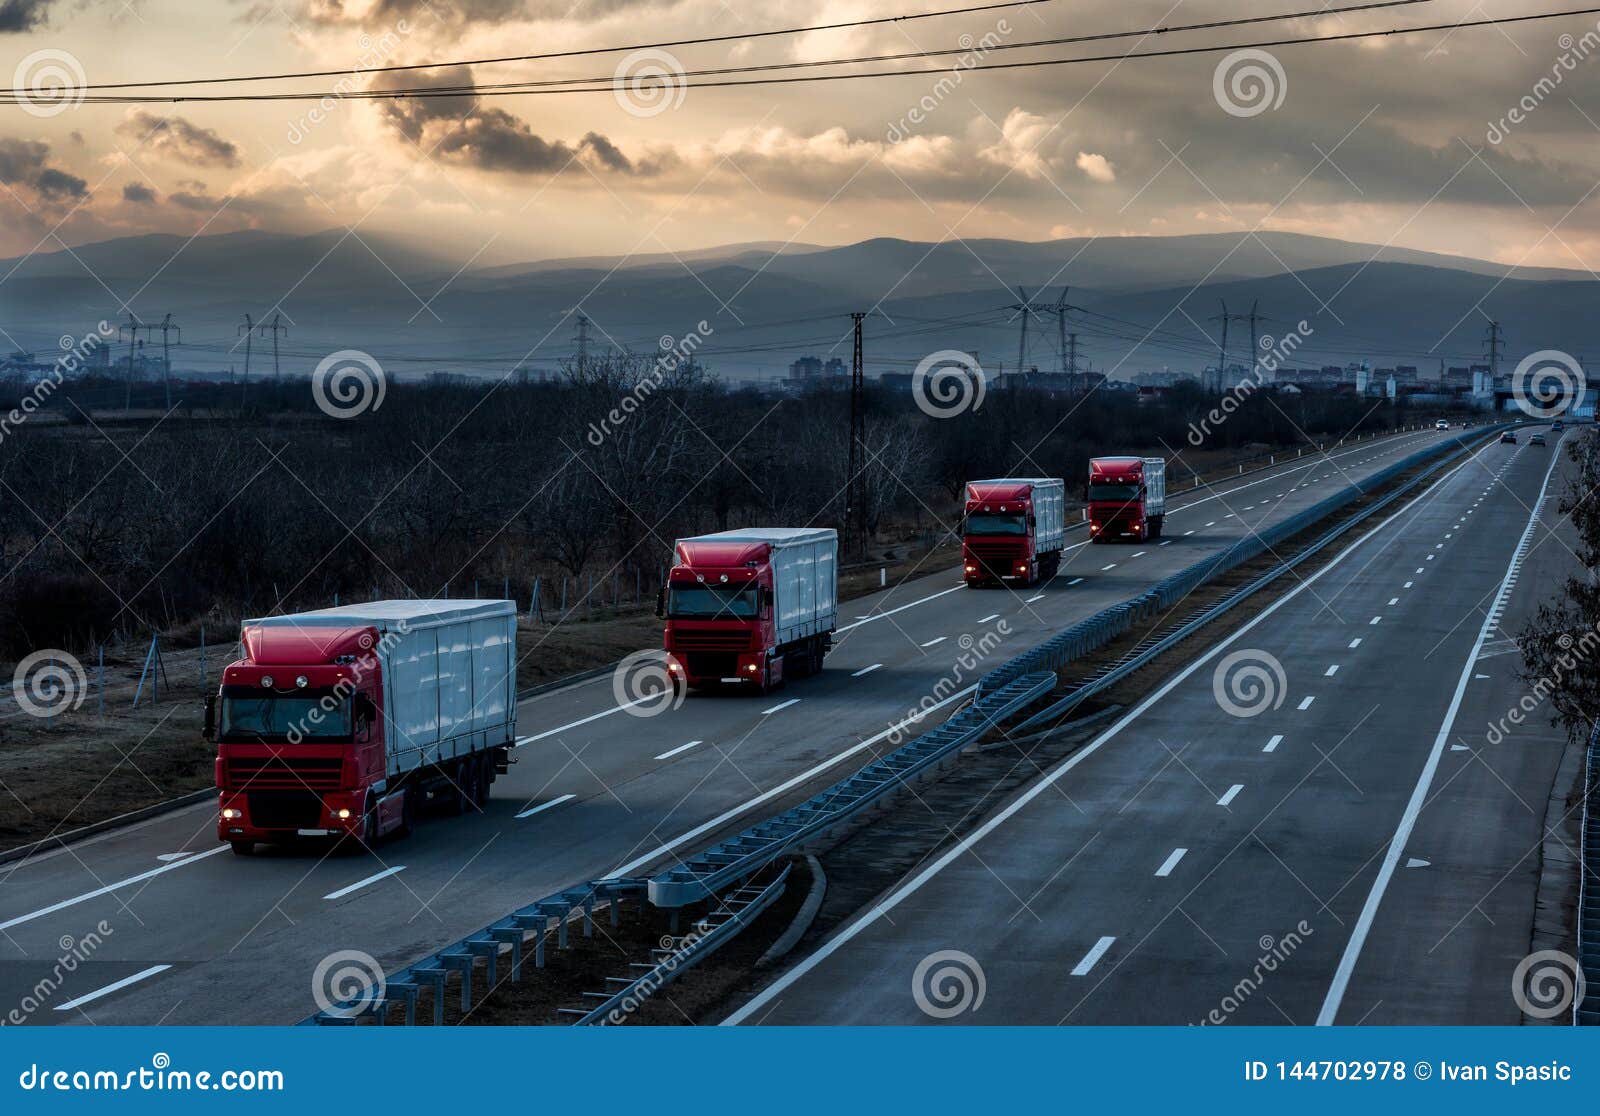 Caravan or Convoy of Lorry Trucks on Country Highway Stock Photo ...